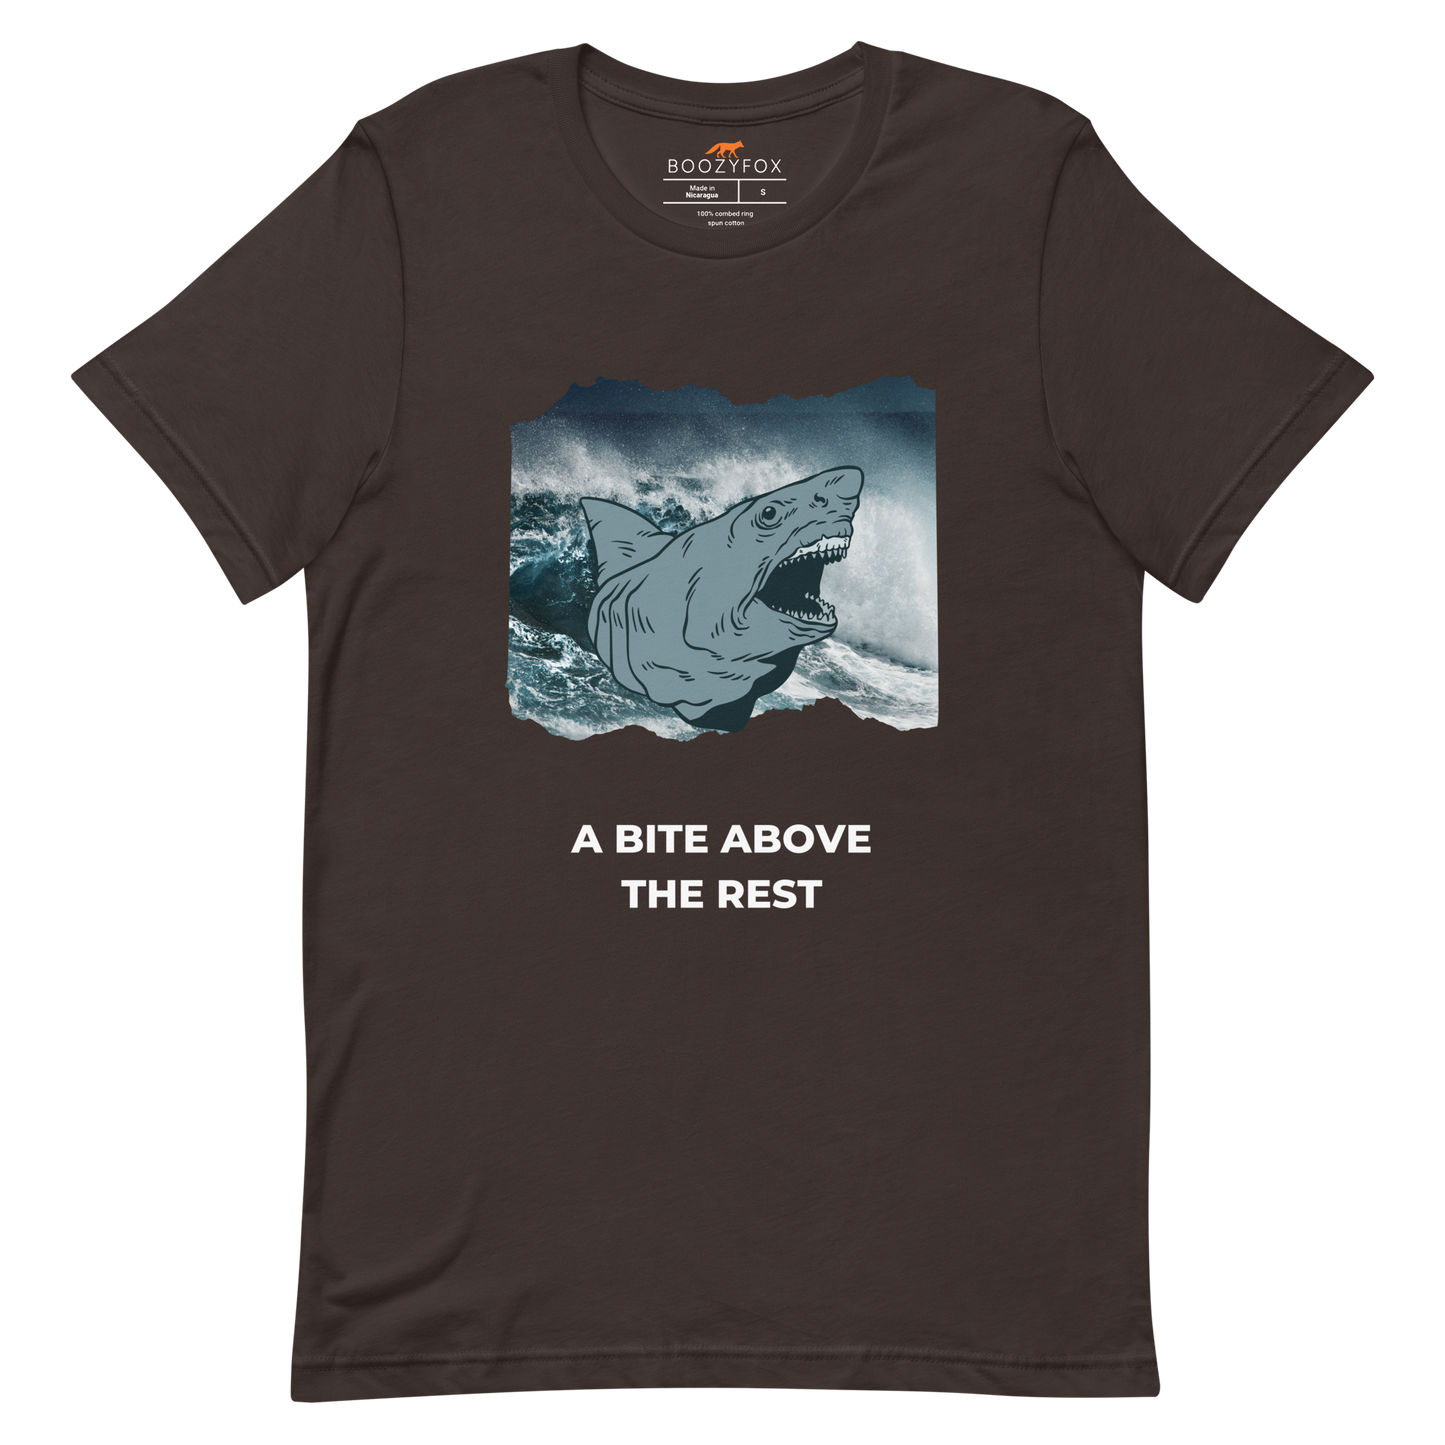 Brown Premium Megalodon Tee featuring A Bite Above the Rest graphic on the chest - Funny Graphic Megalodon Tees - Boozy Fox